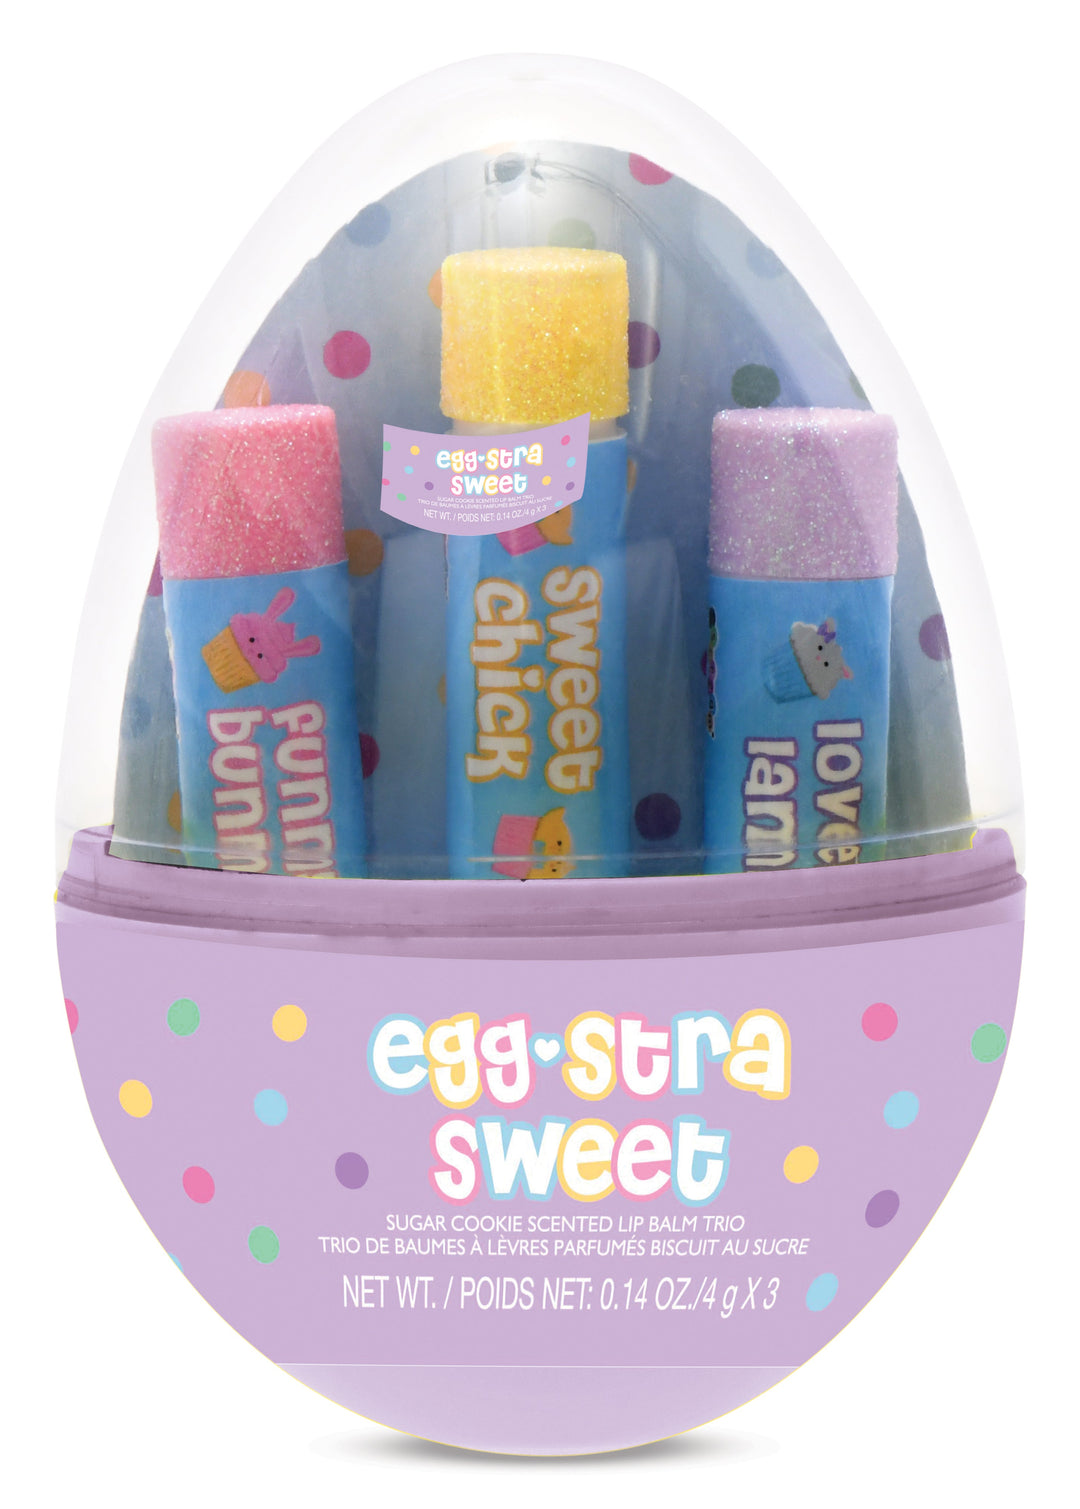 EGG-STRA SWEET LIP BALM TRIO EGG Iscream Easter Gifts & Basket Fillers Bonjour Fete - Party Supplies